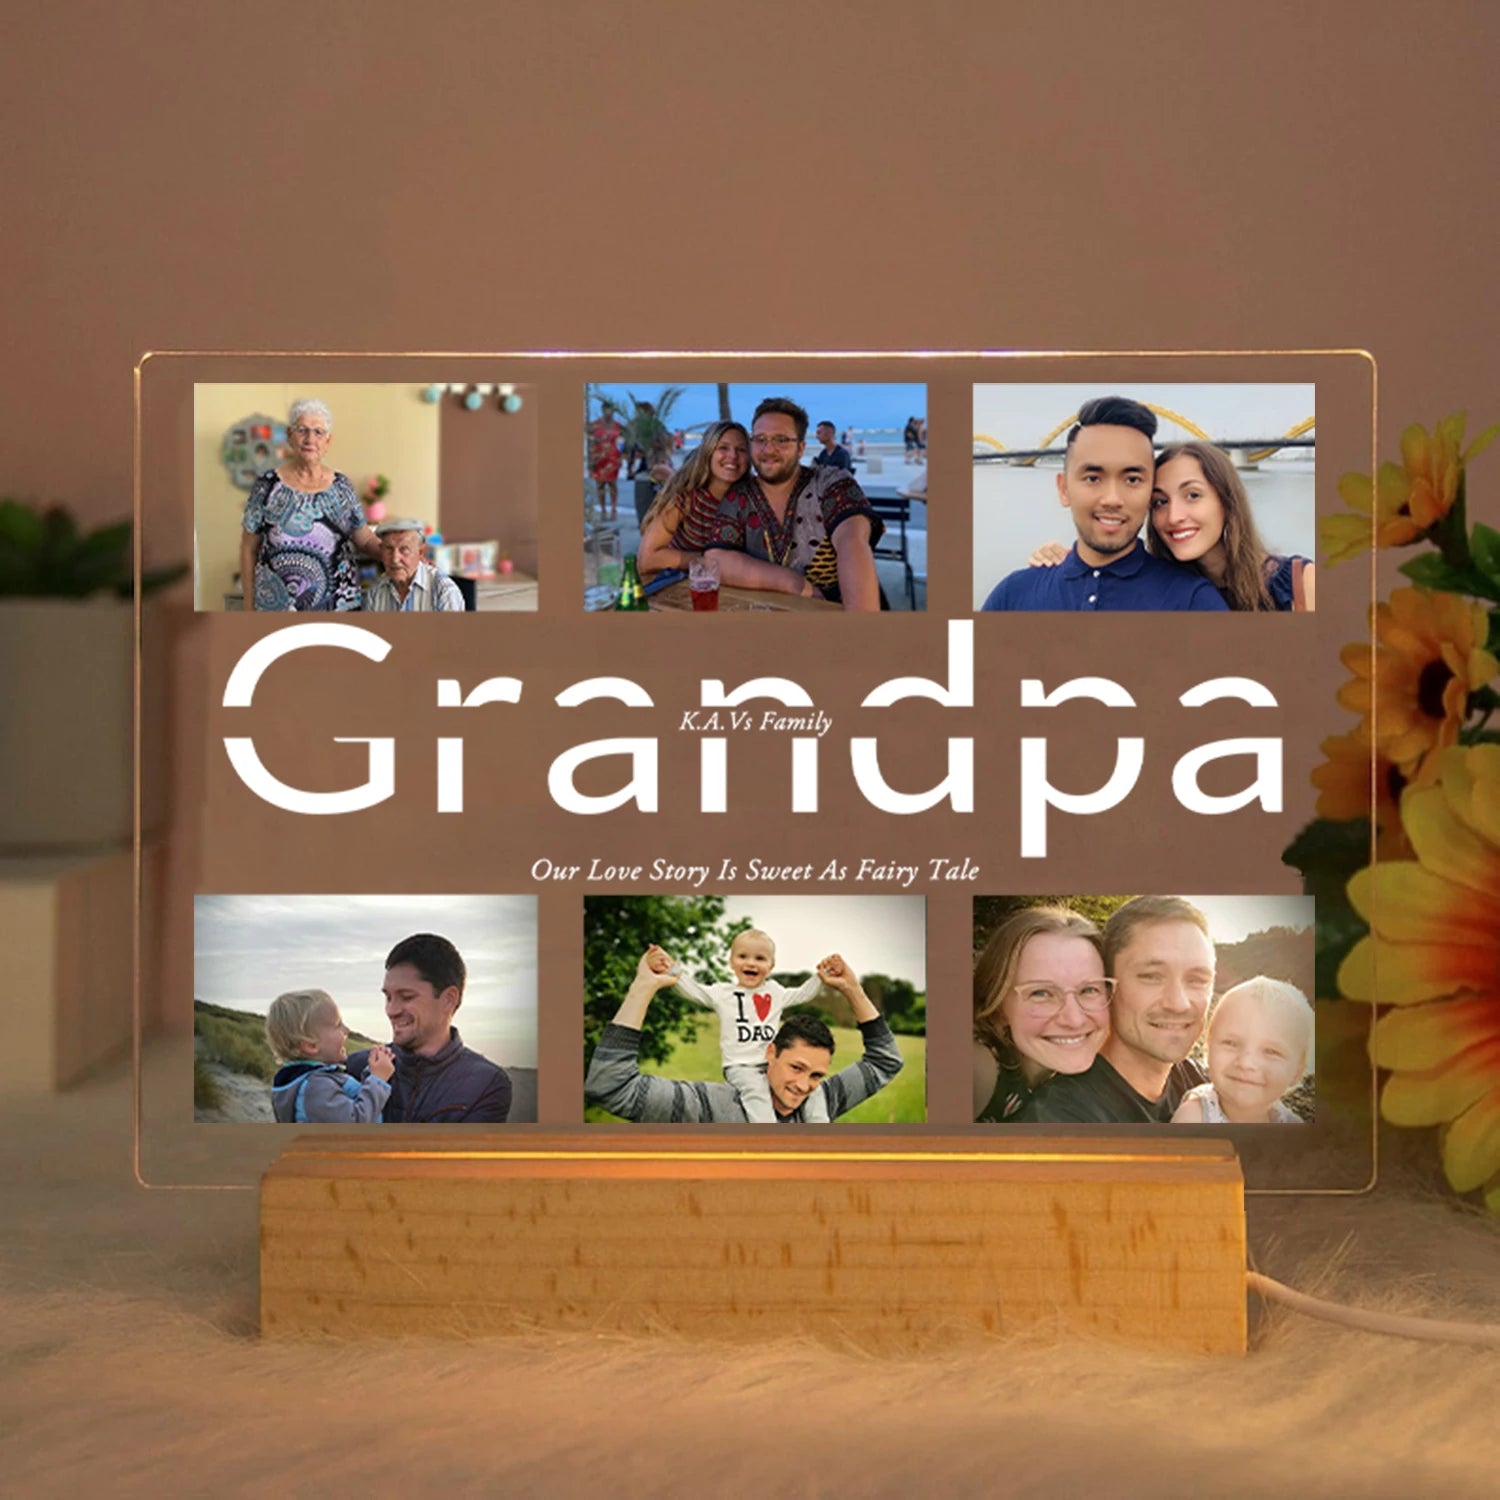 Personalized Custom Photo Text 3D Acrylic Lamp - Customized Bedroom Night Light for MOM DAD LOVE Family Day Christmas Birthday Gift Warm Light / Grandpa